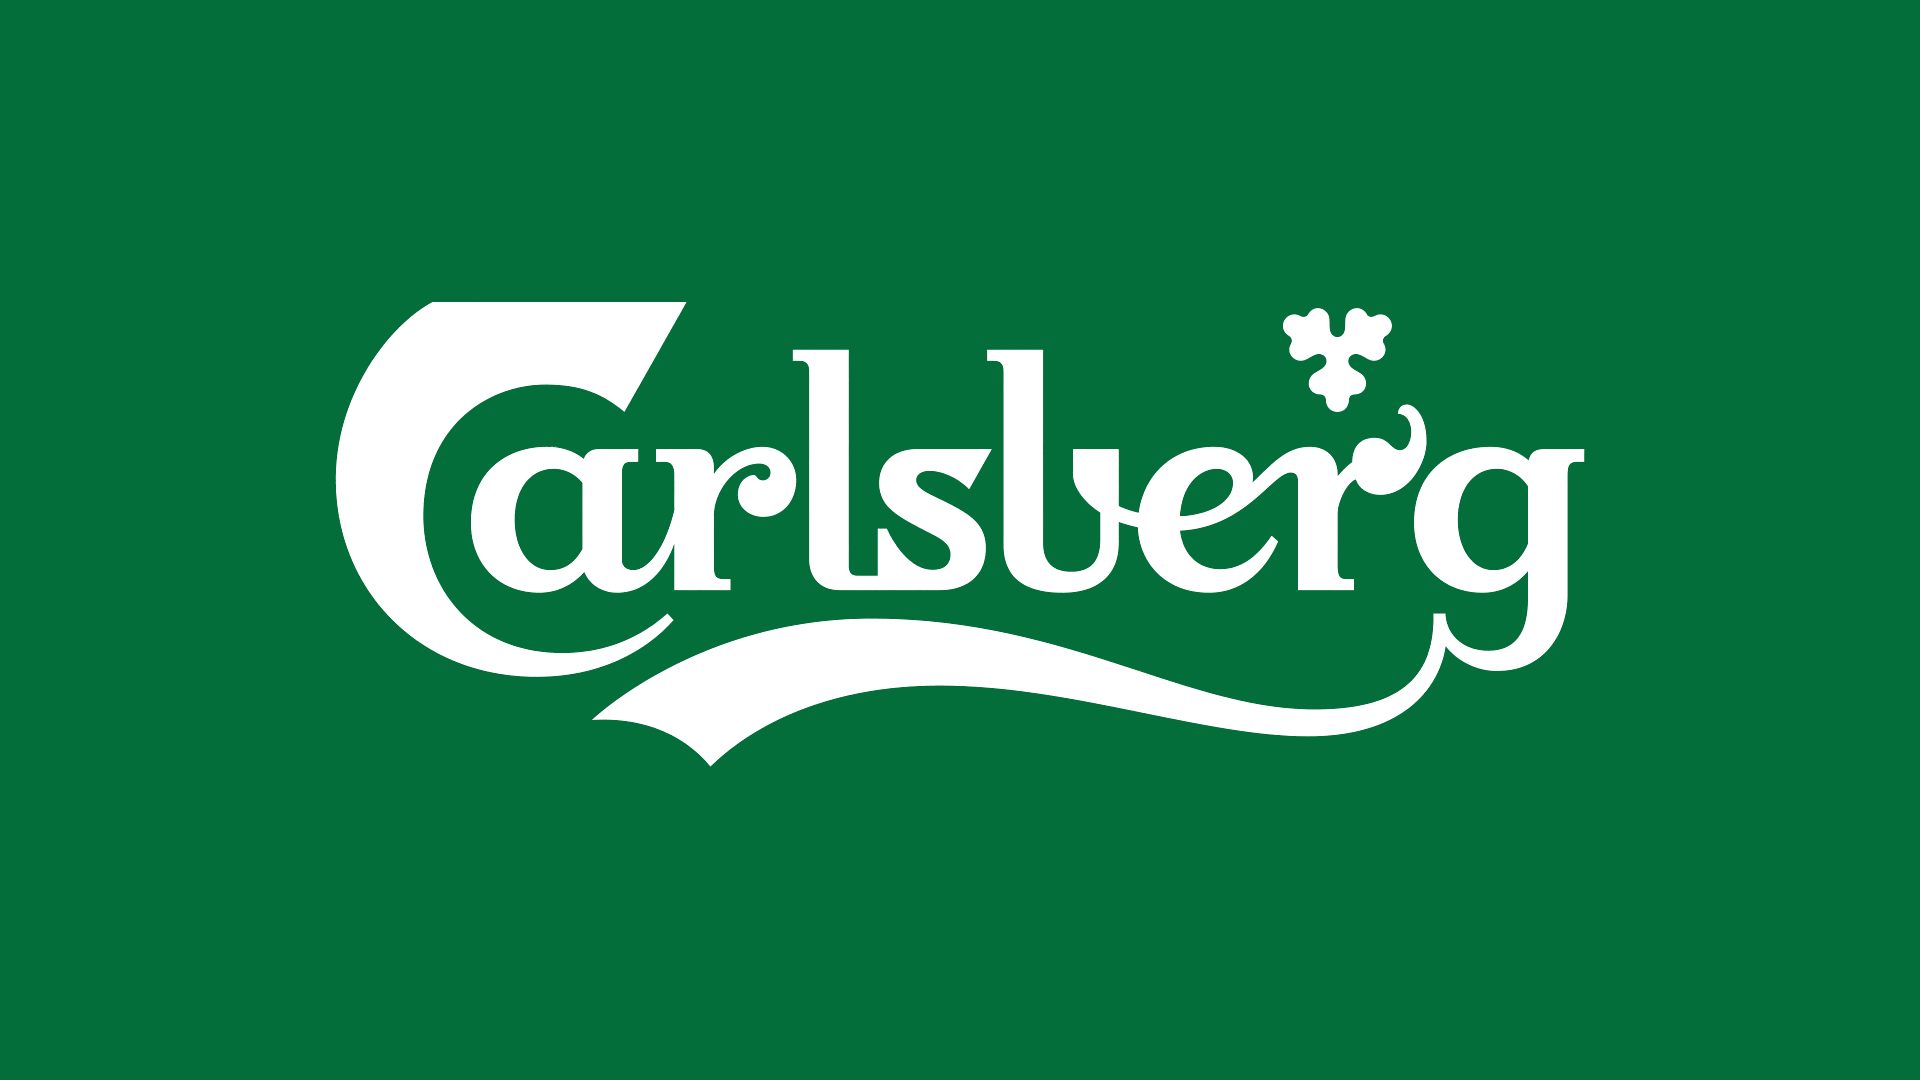 Our cooperated brand-Carlsberg